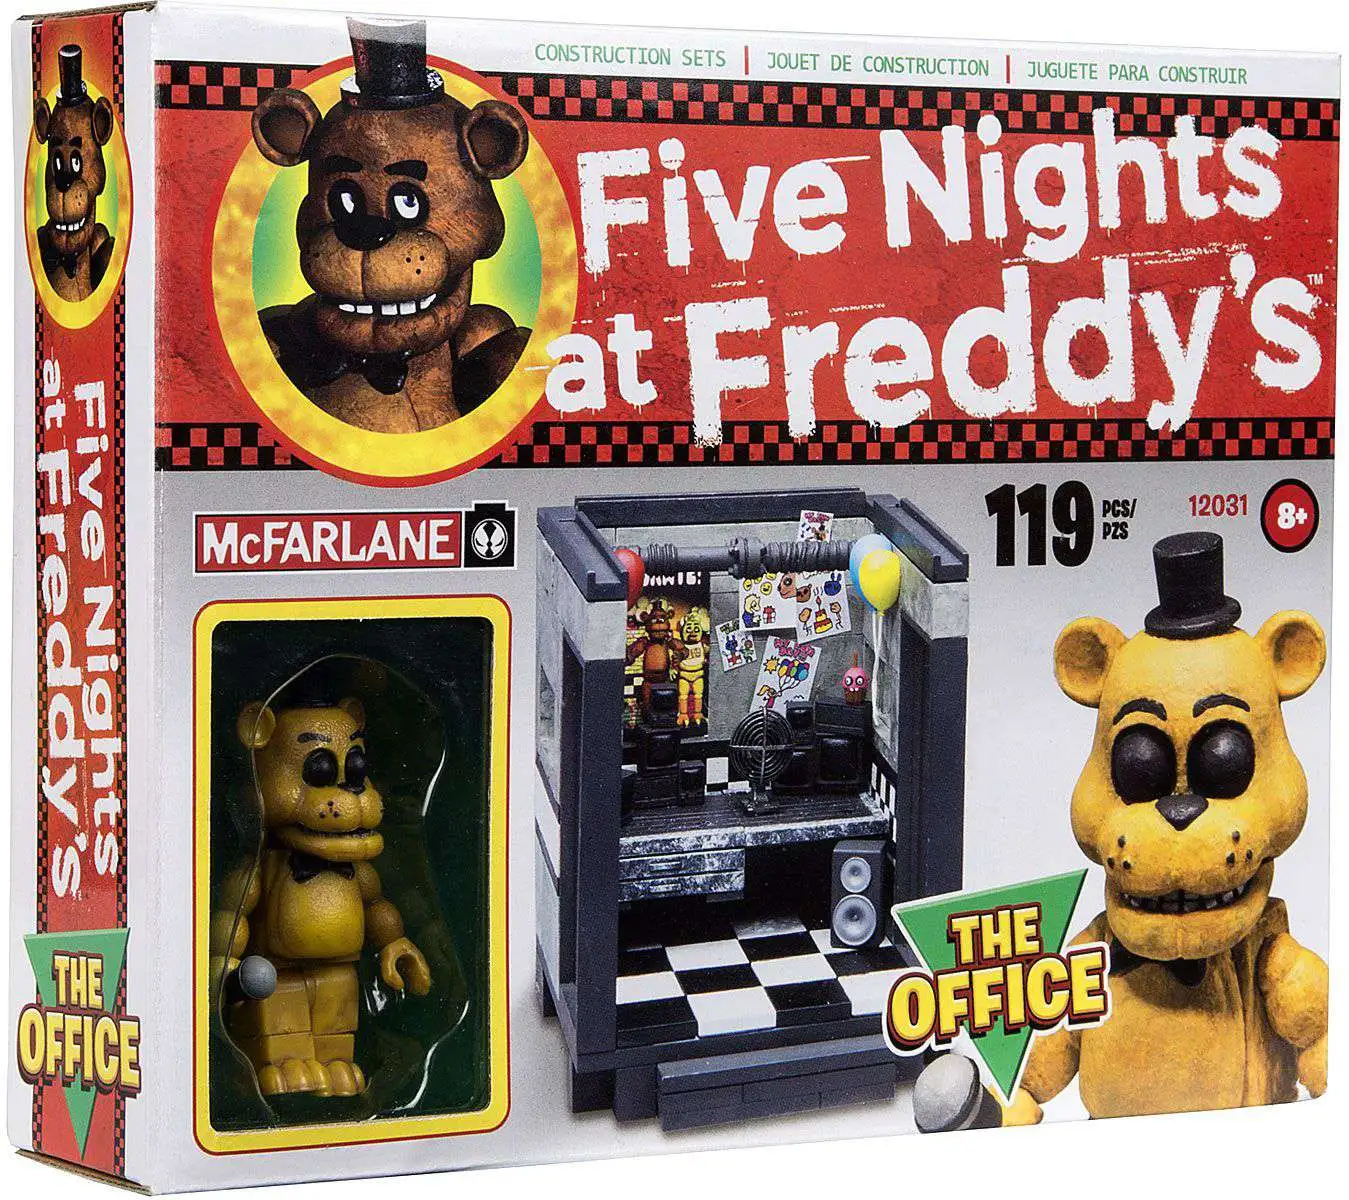 McFarlane Toys Five Nights At Freddys The Security Office Construction Set 